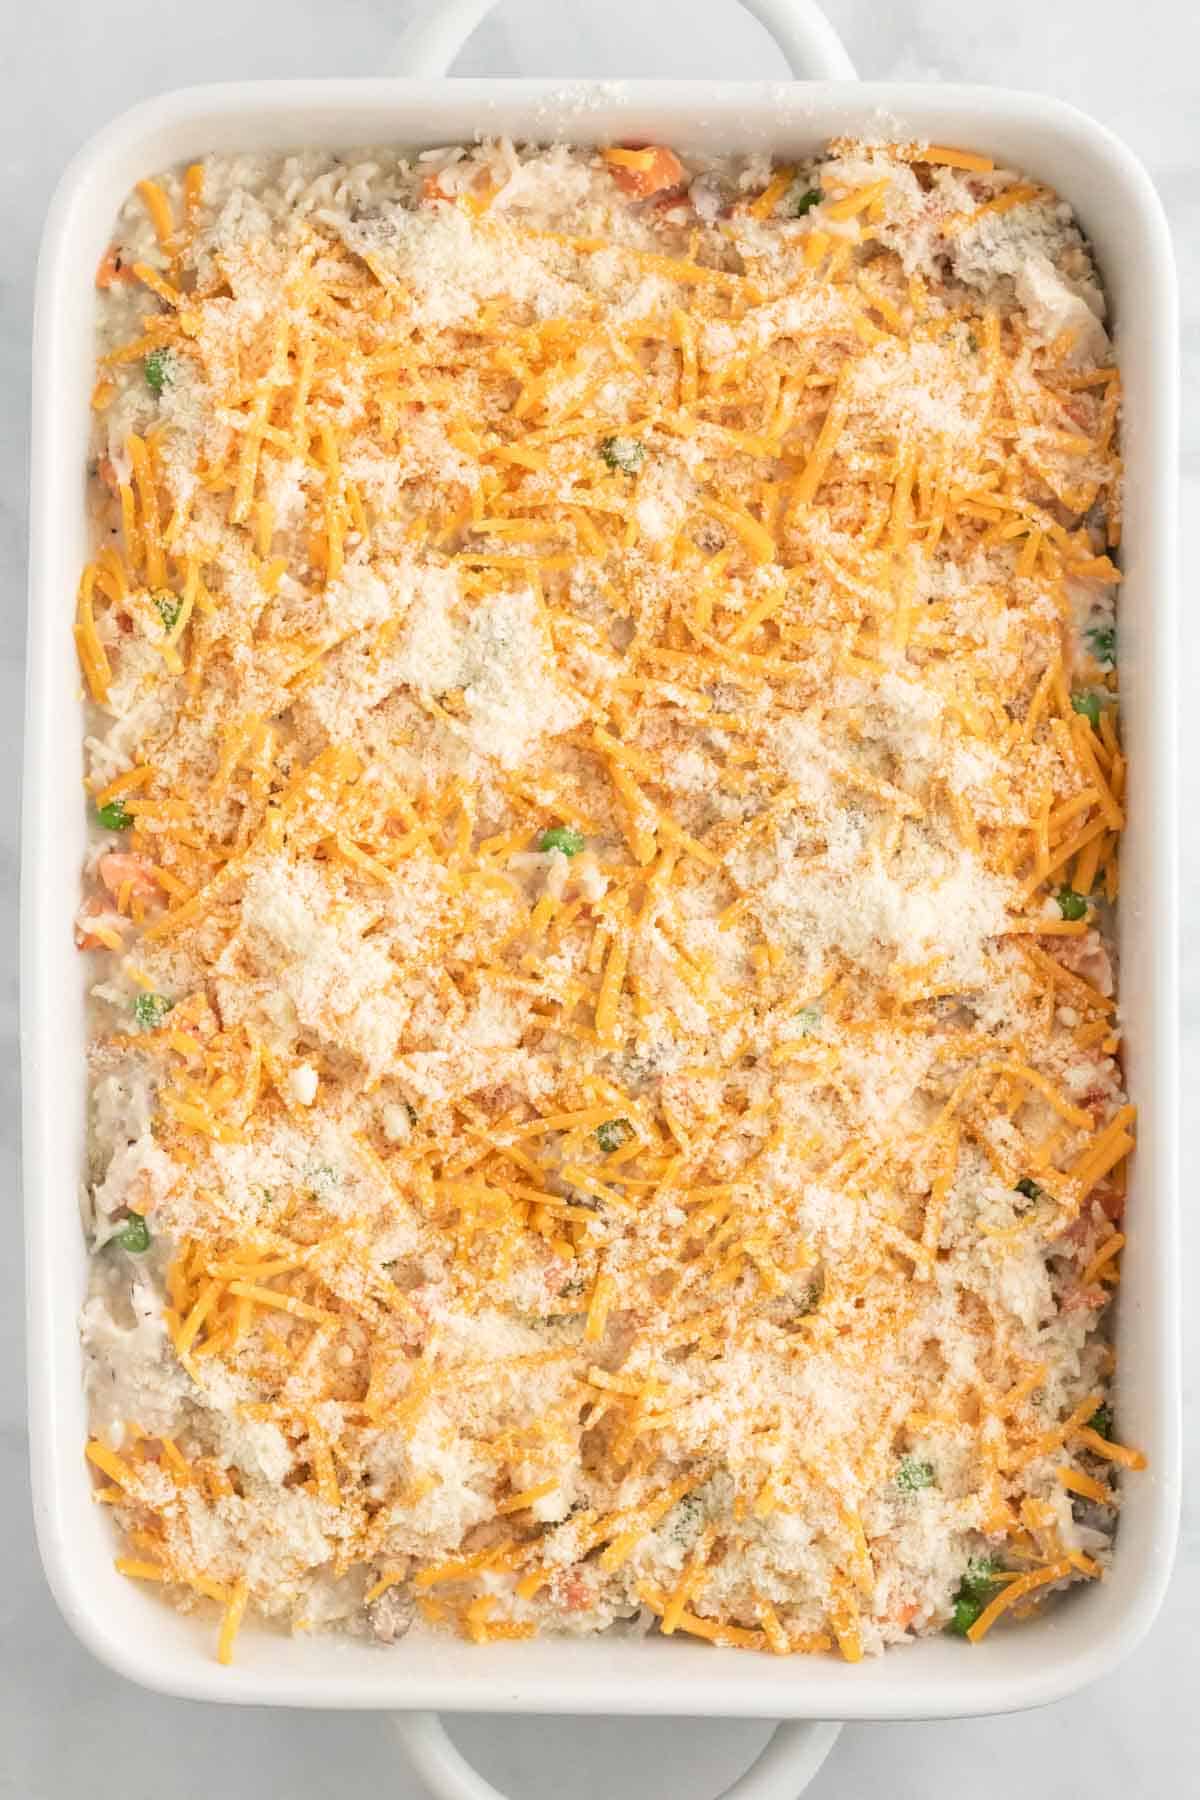 Creamy chicken and rice in a casserole dish is topped with shredded cheese.